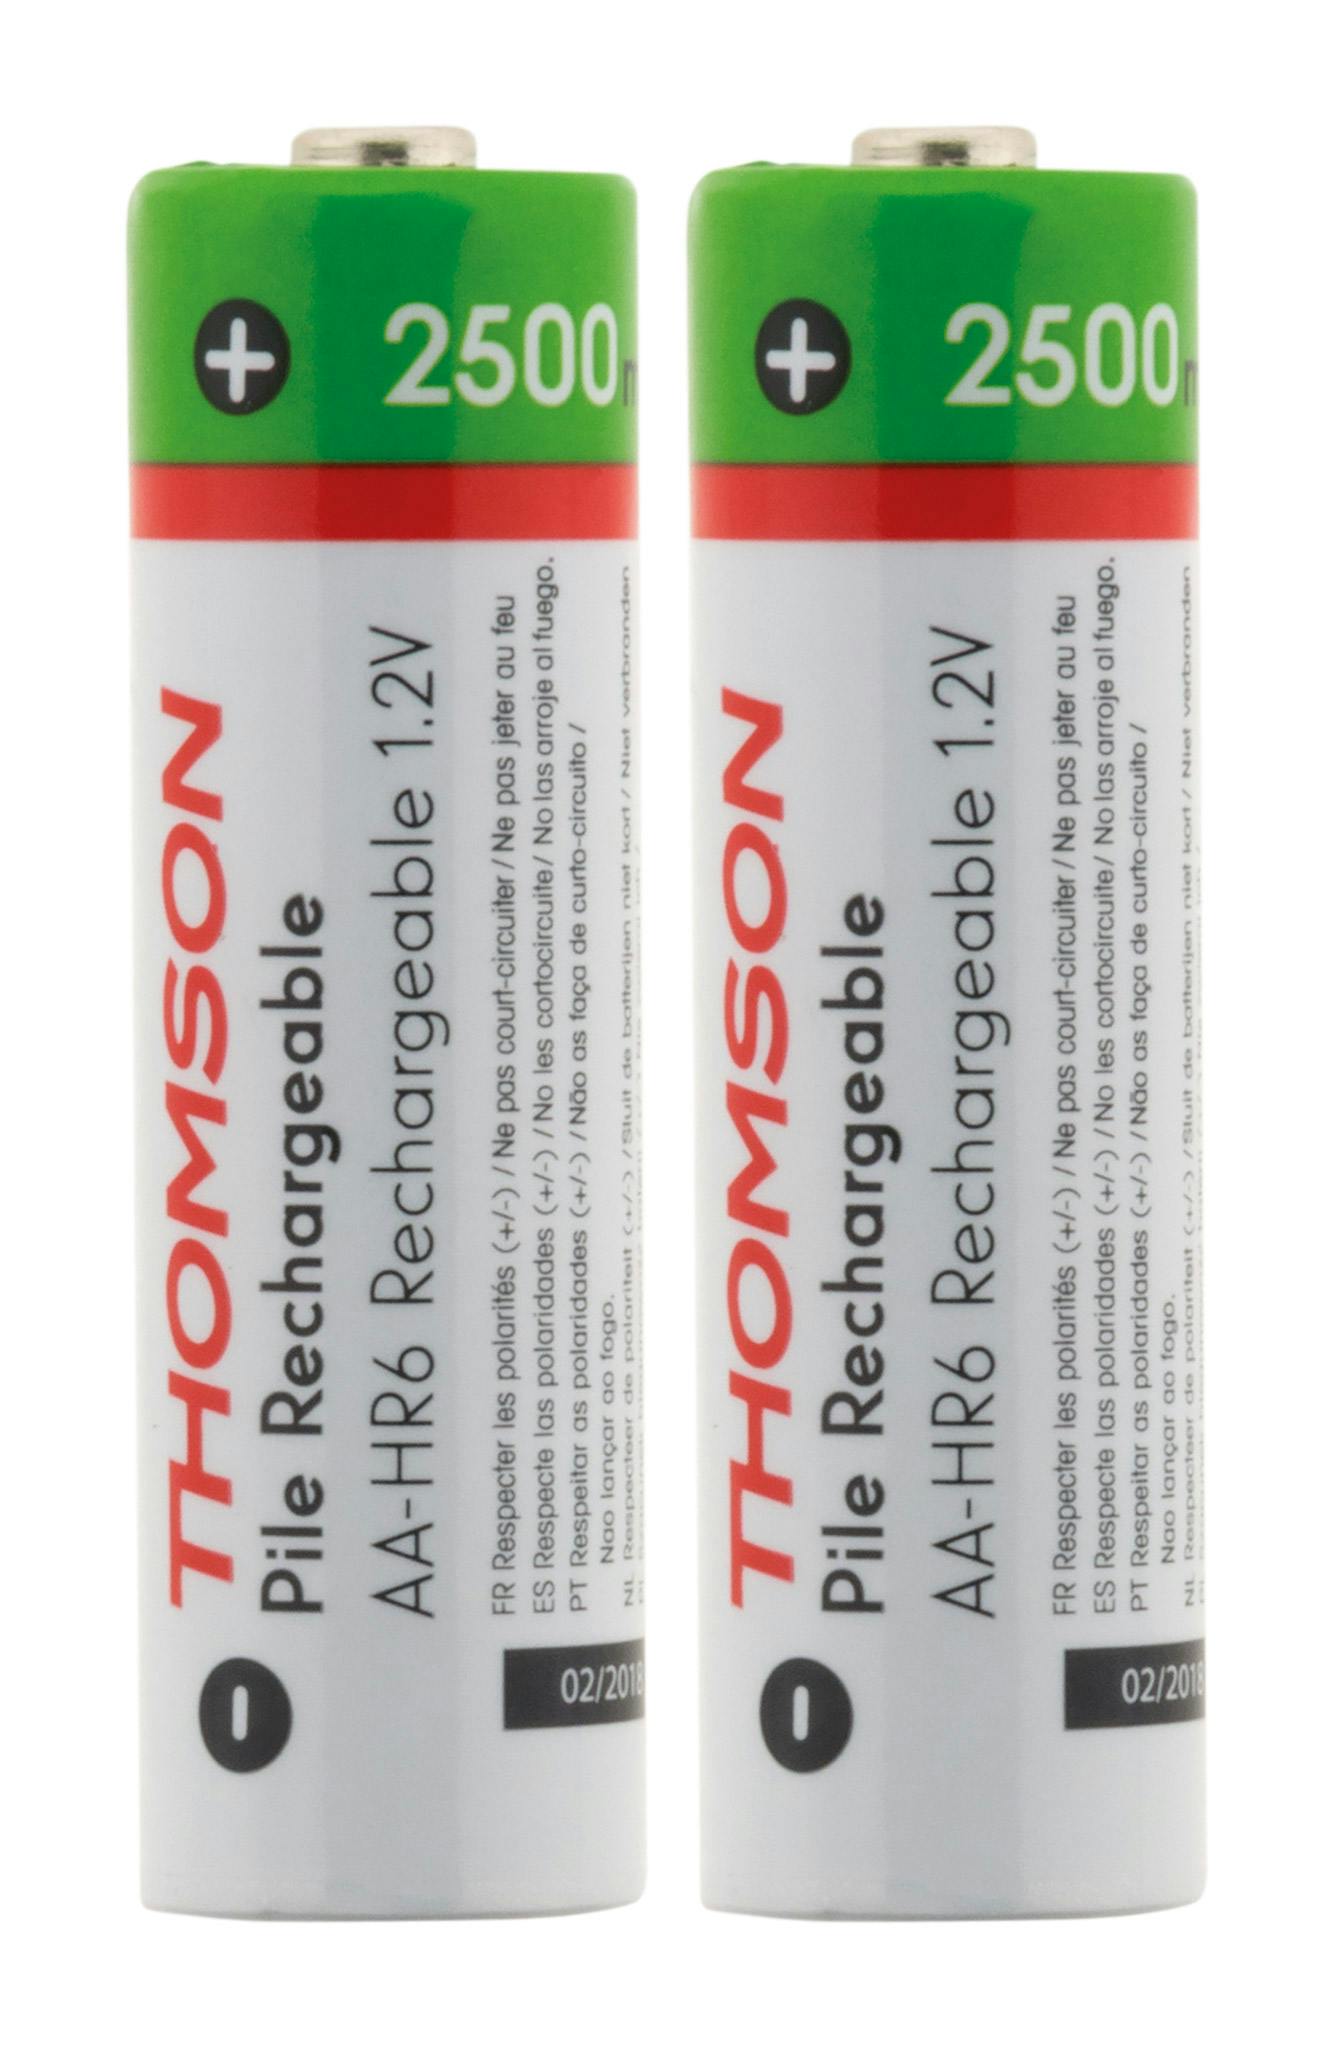 THOMSON Pack 2x piles rechargeables HR06 AA 2500 mAh 